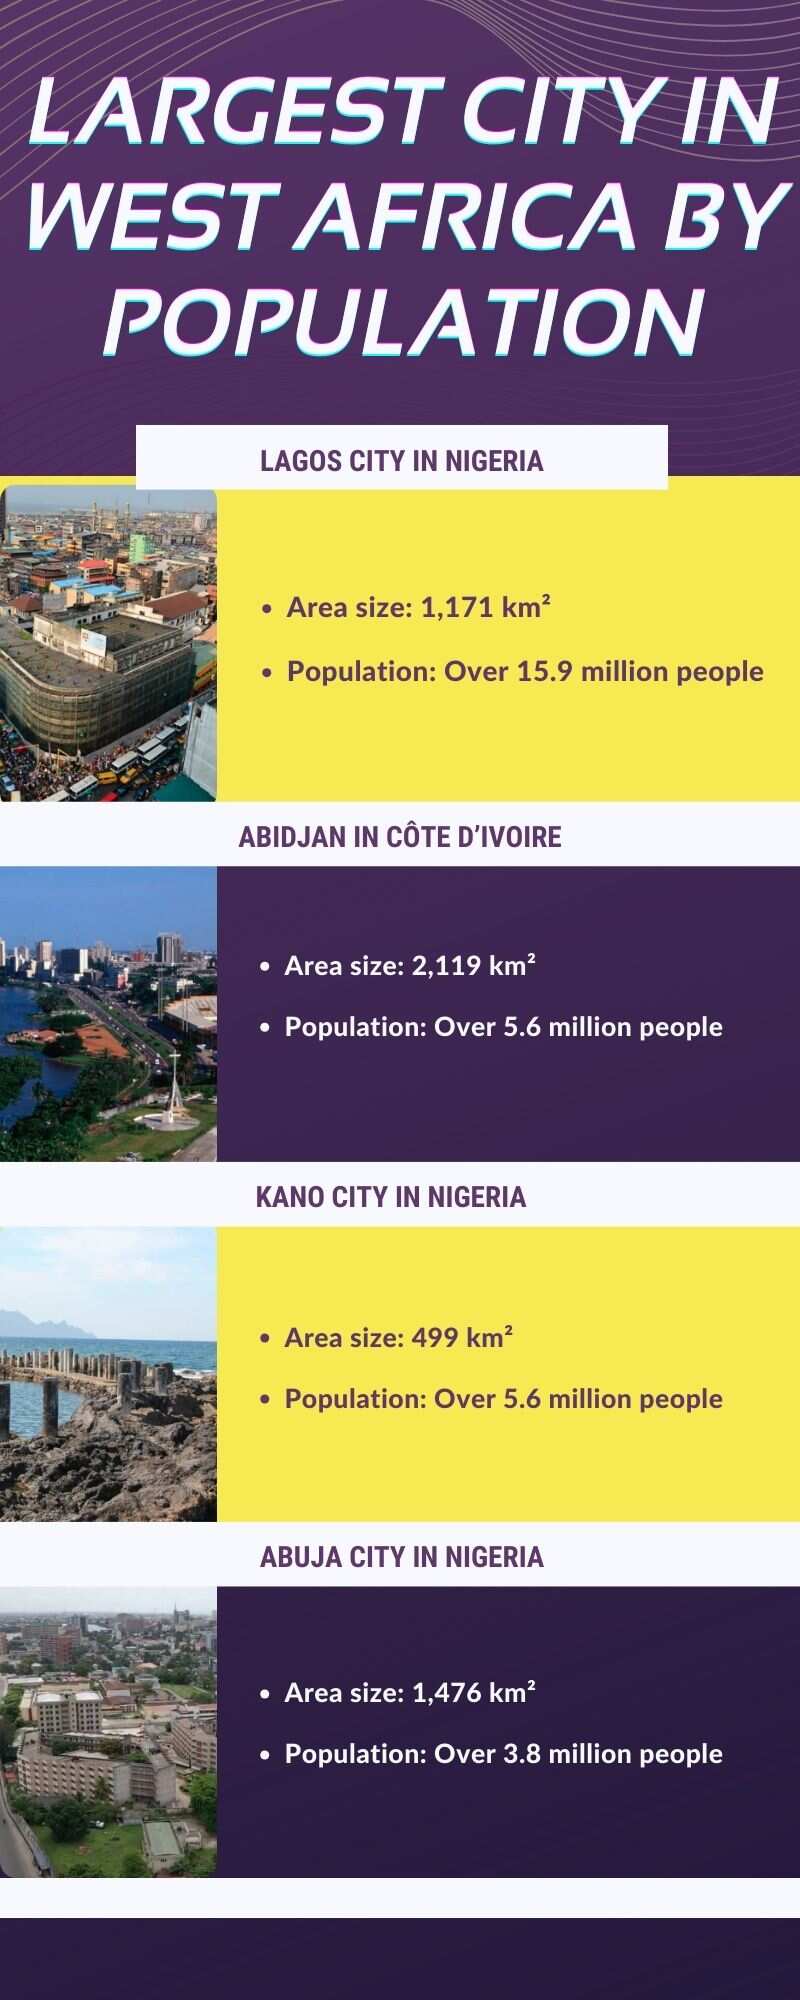 Largest city in West Africa by population